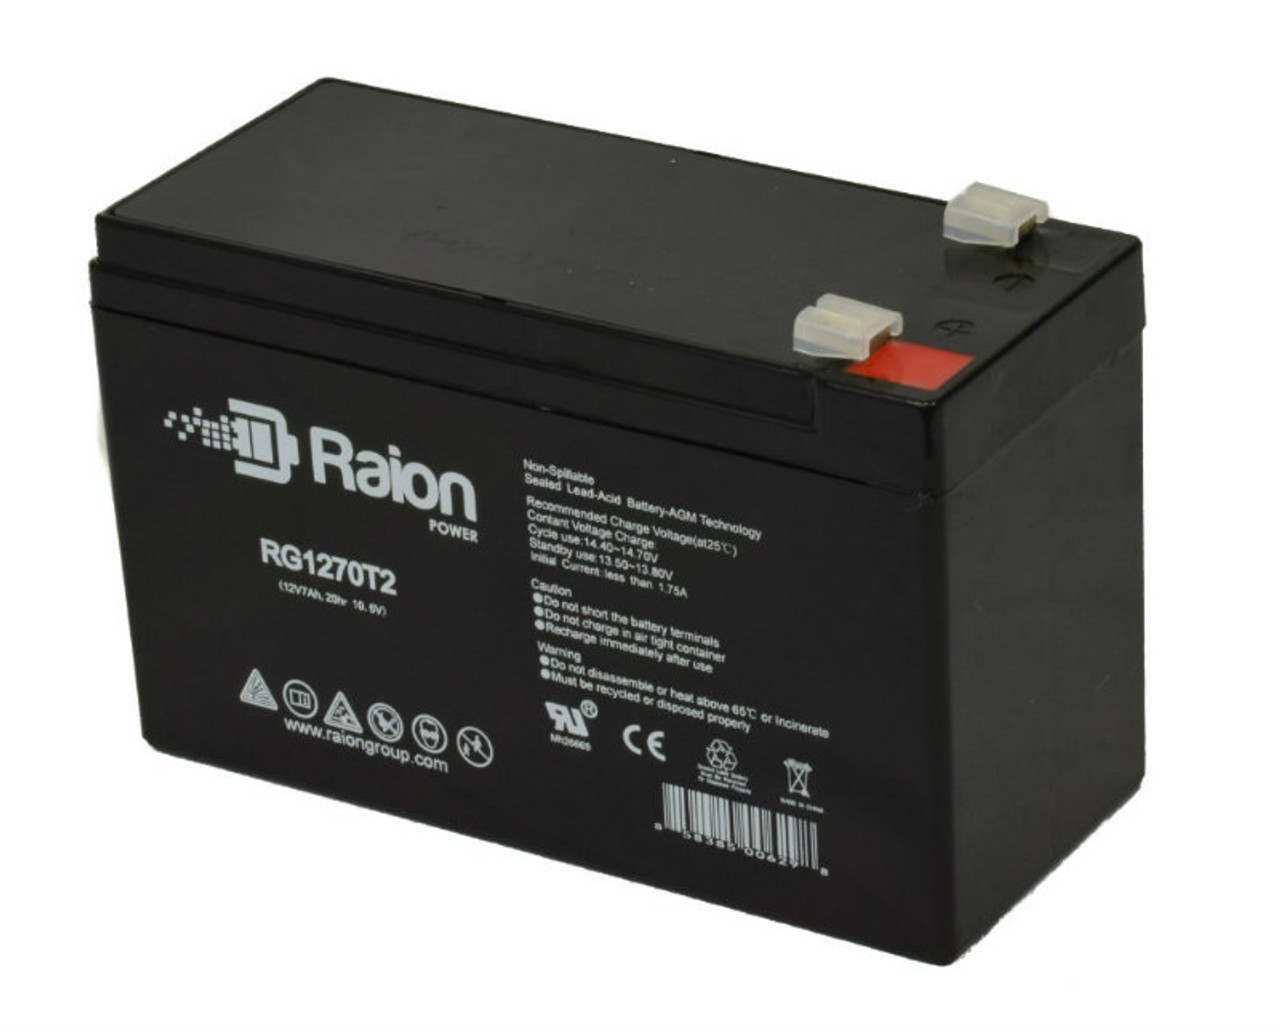 Raion Power RG1270T1 12V 7Ah Non-Spillable Replacement Battery for Panasonic LCR12V7.2